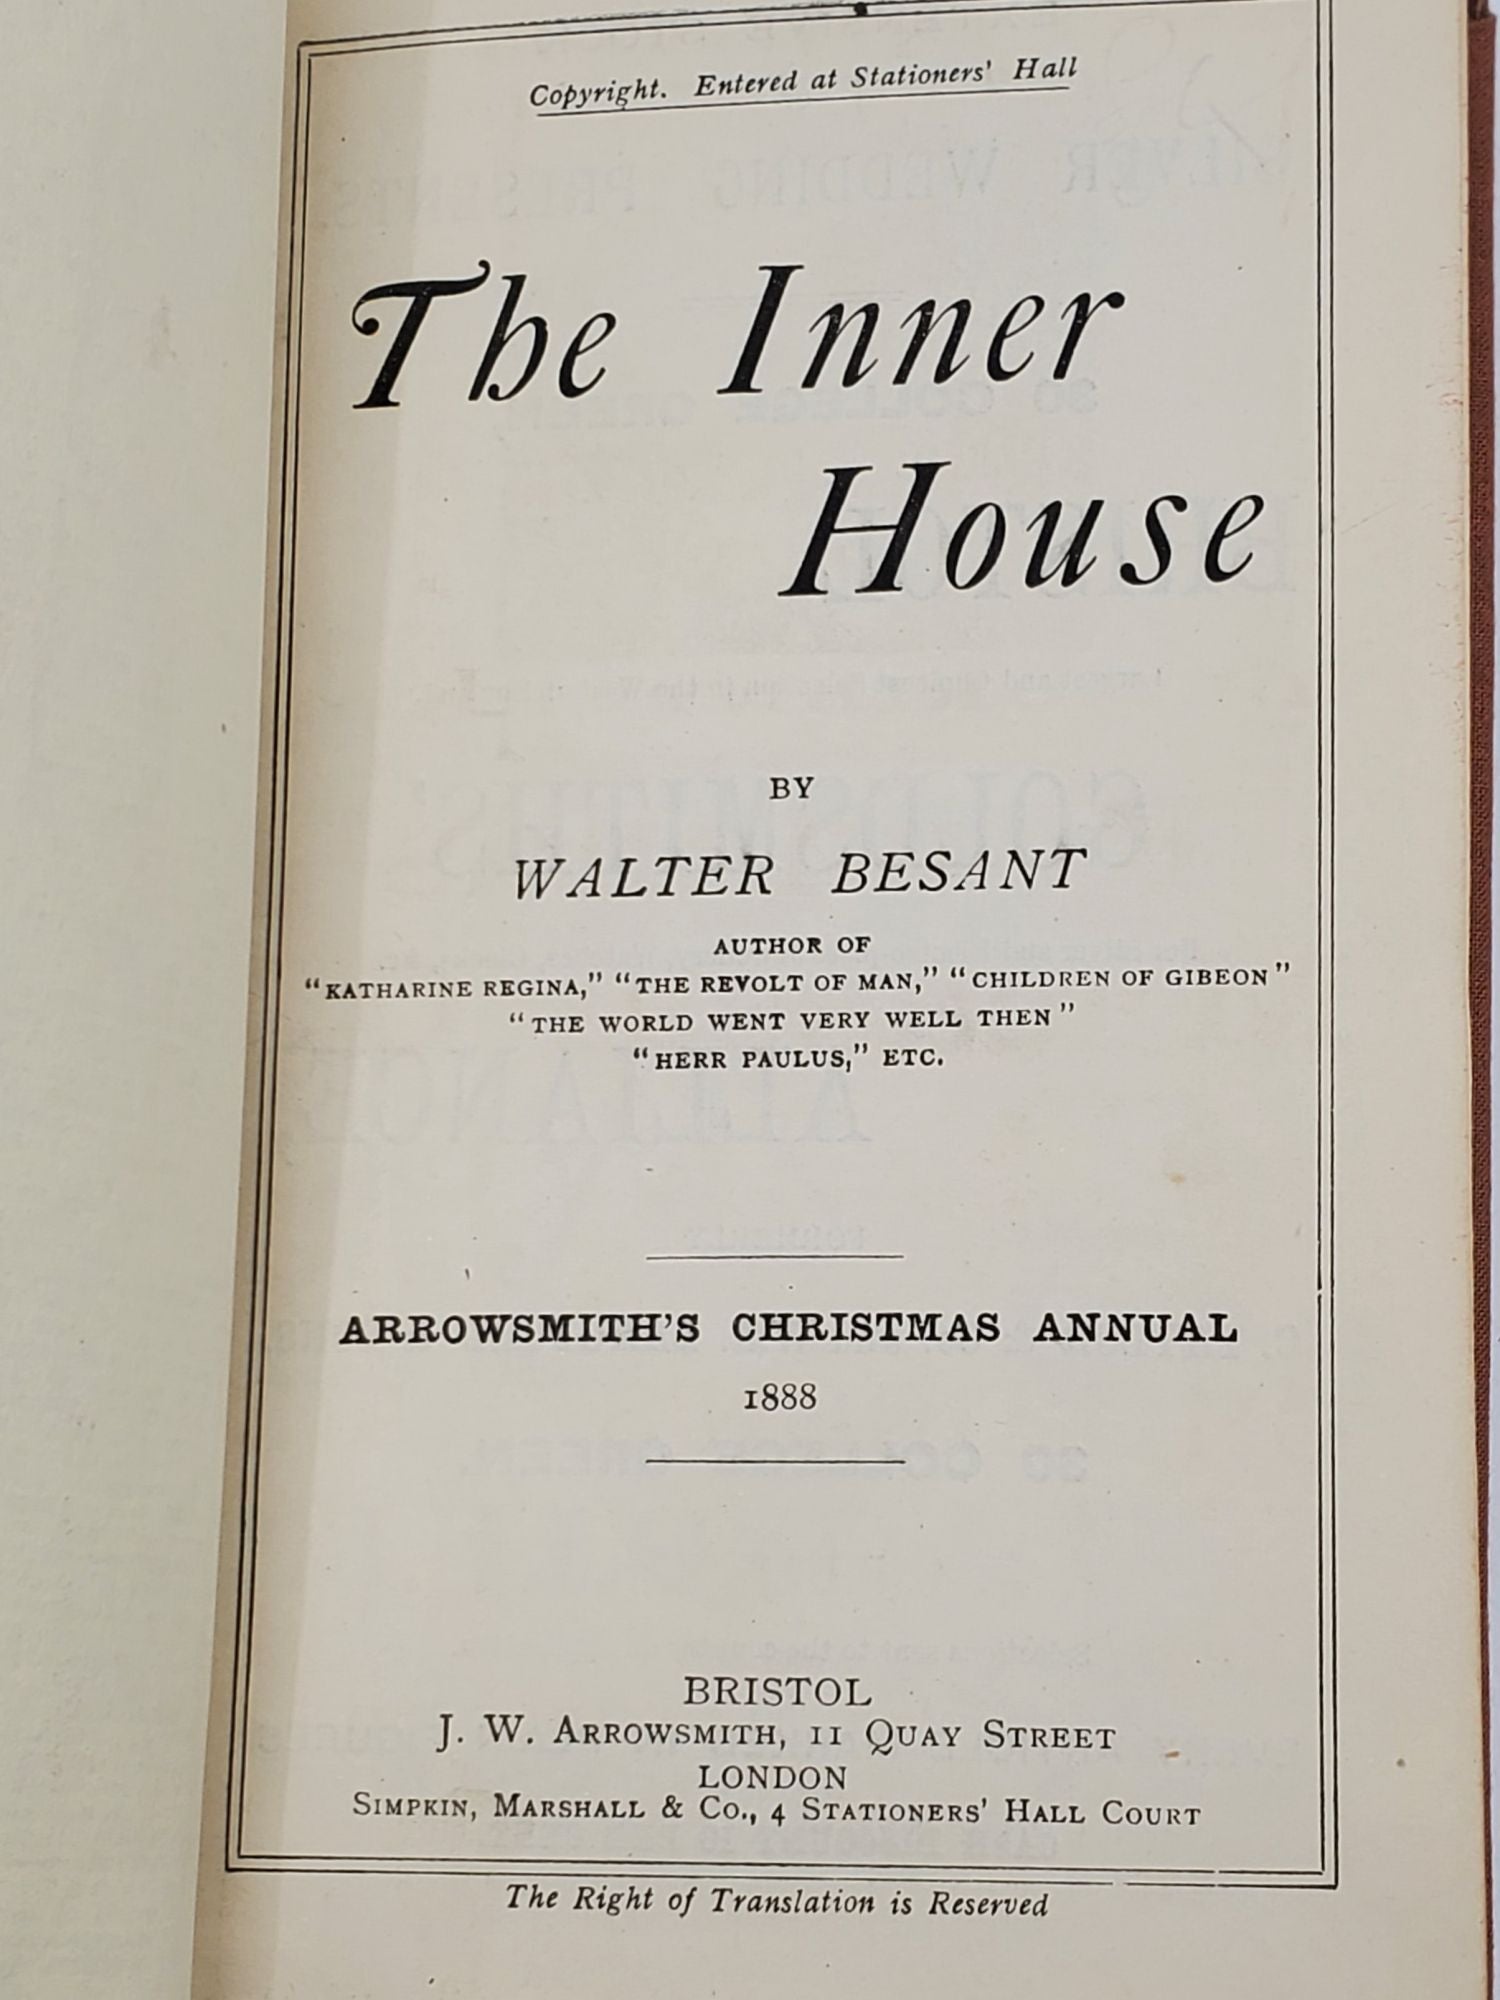 [Book #50884] THE INNER HOUSE. Walter Besant.